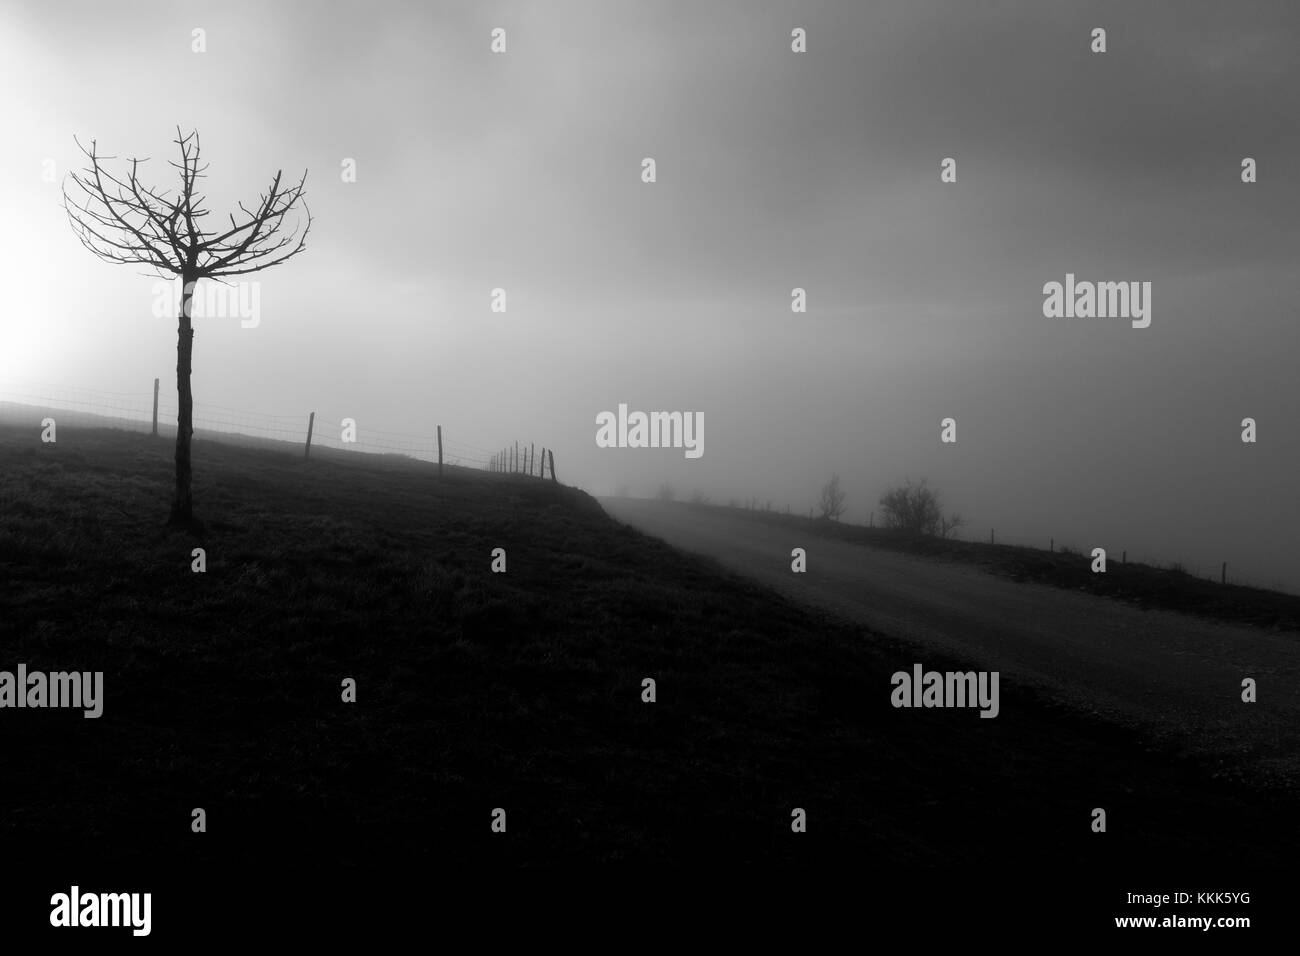 A small tree near a mountain road and fence, with fog and low sun filtering through Stock Photo